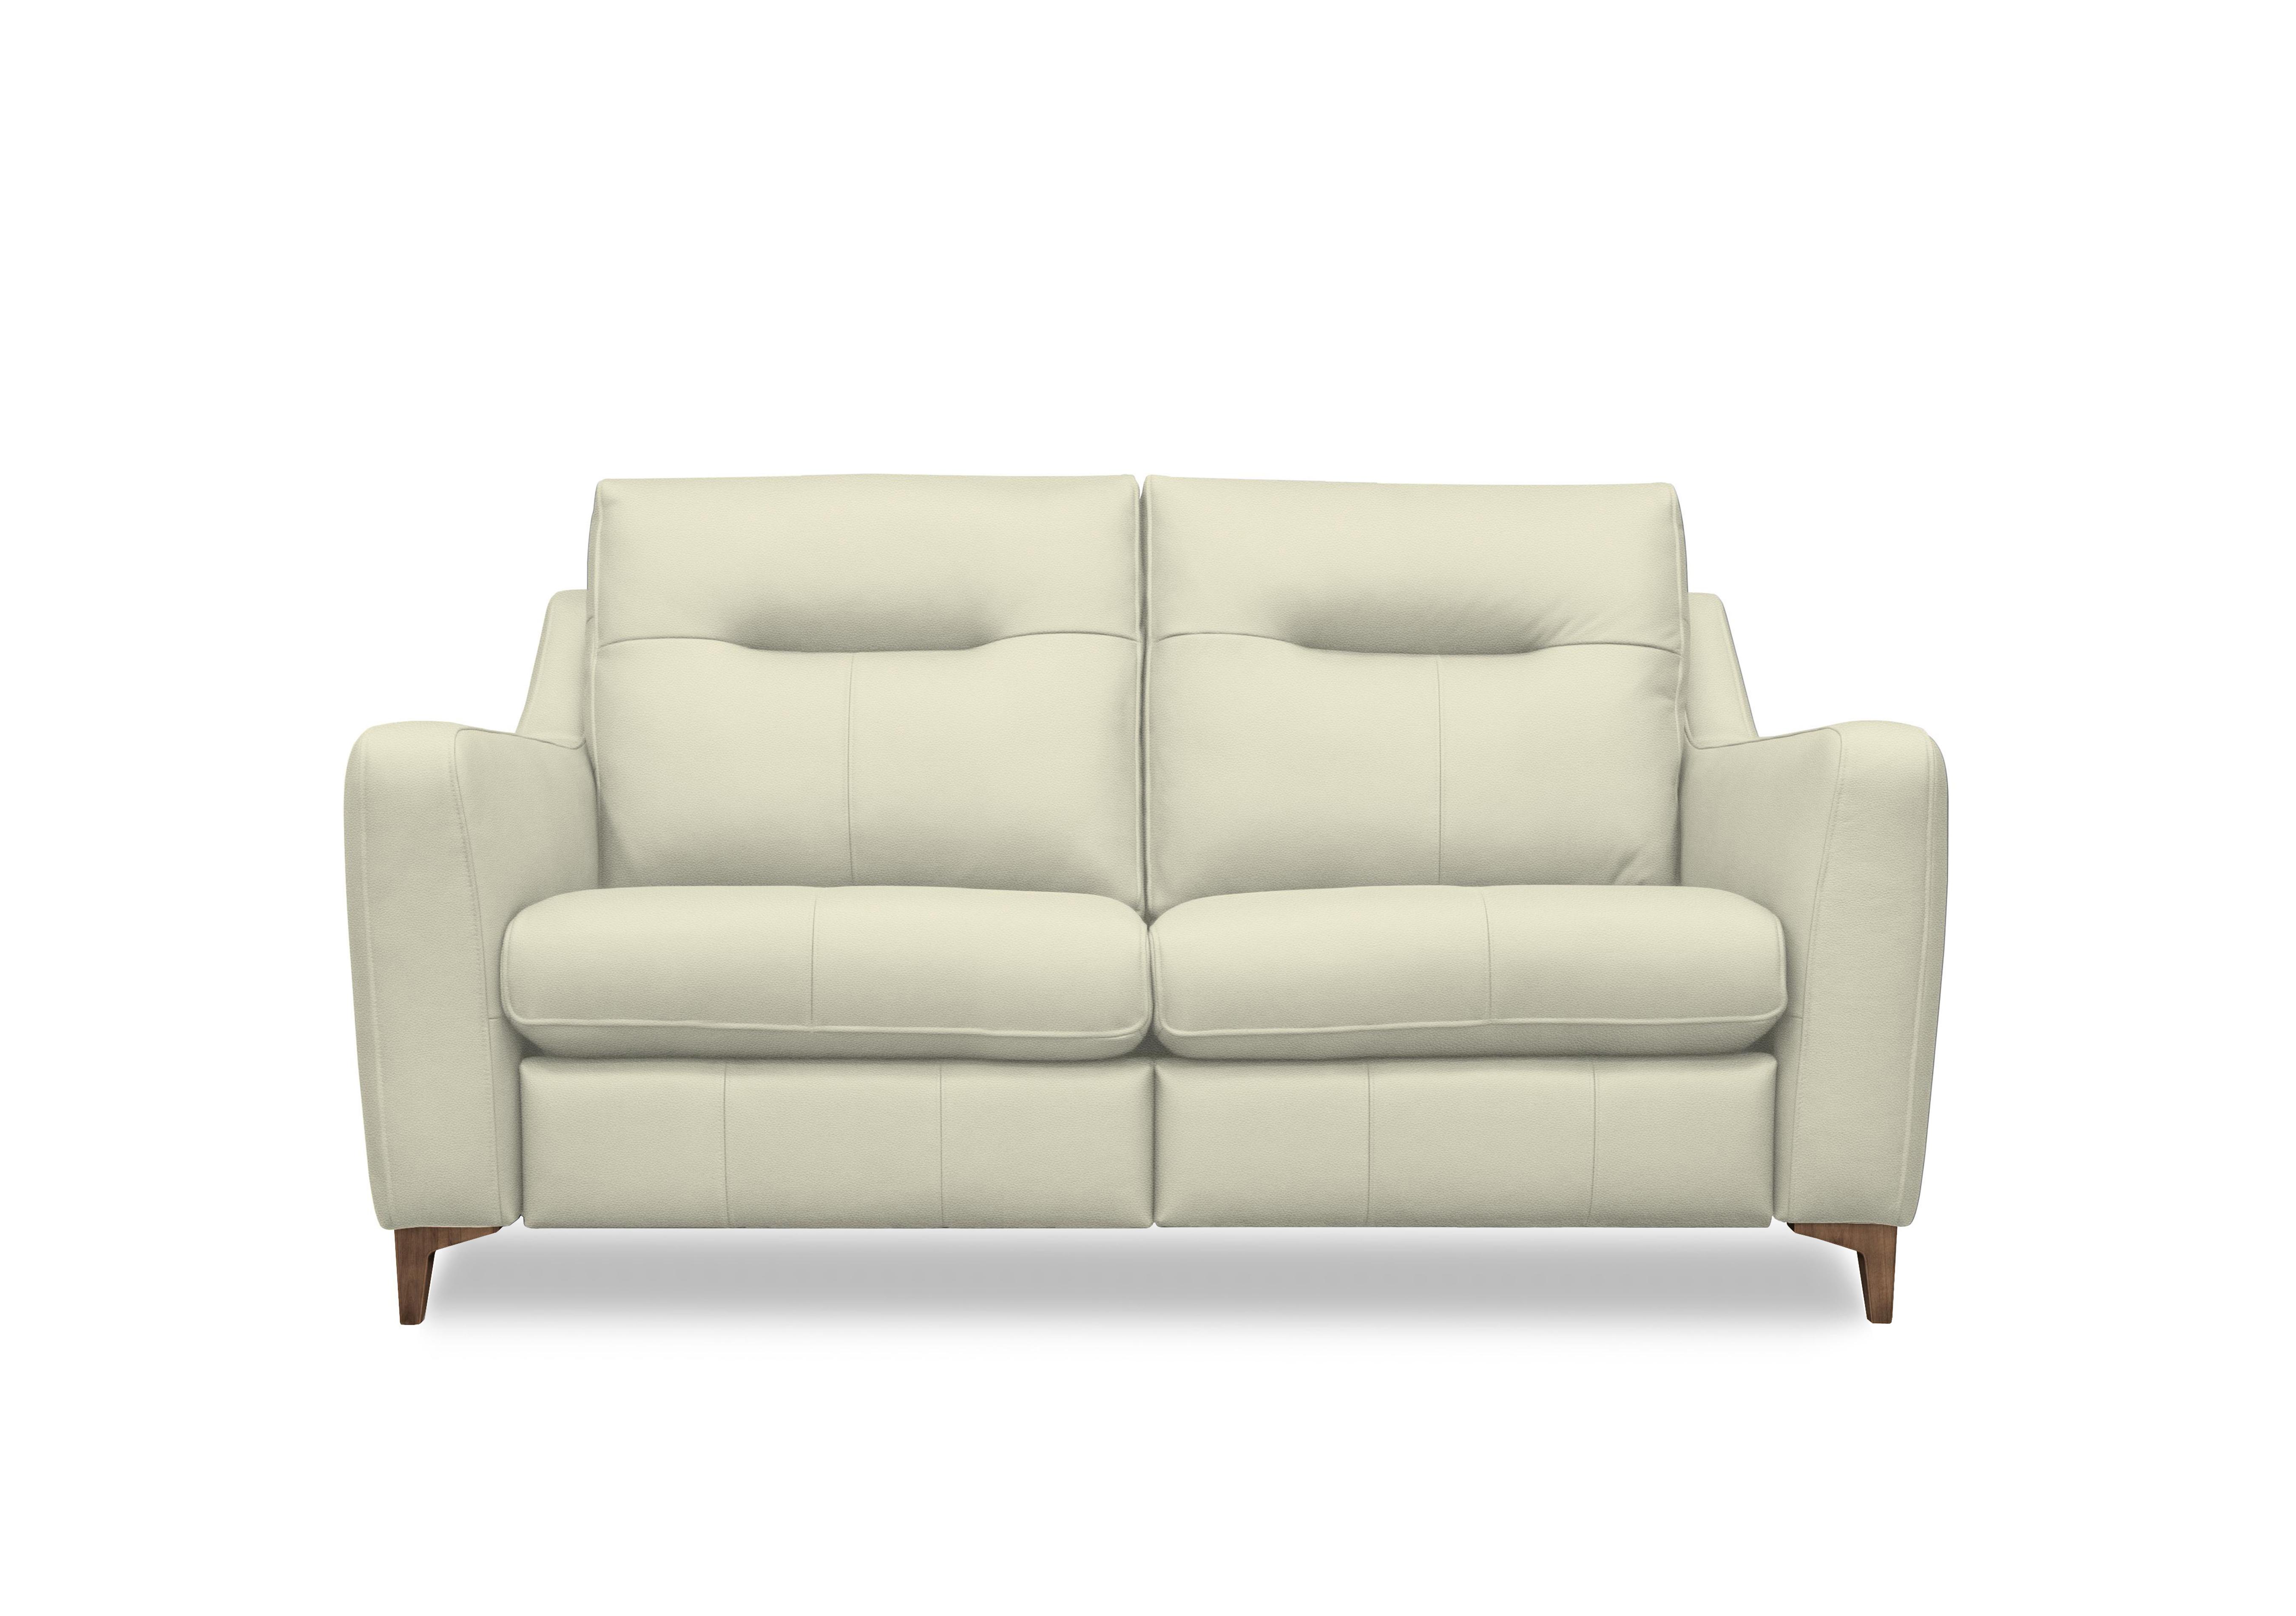 Arlo 2 Seater Leather Sofa in L840 Cambridge Chalk Wal Ft on Furniture Village